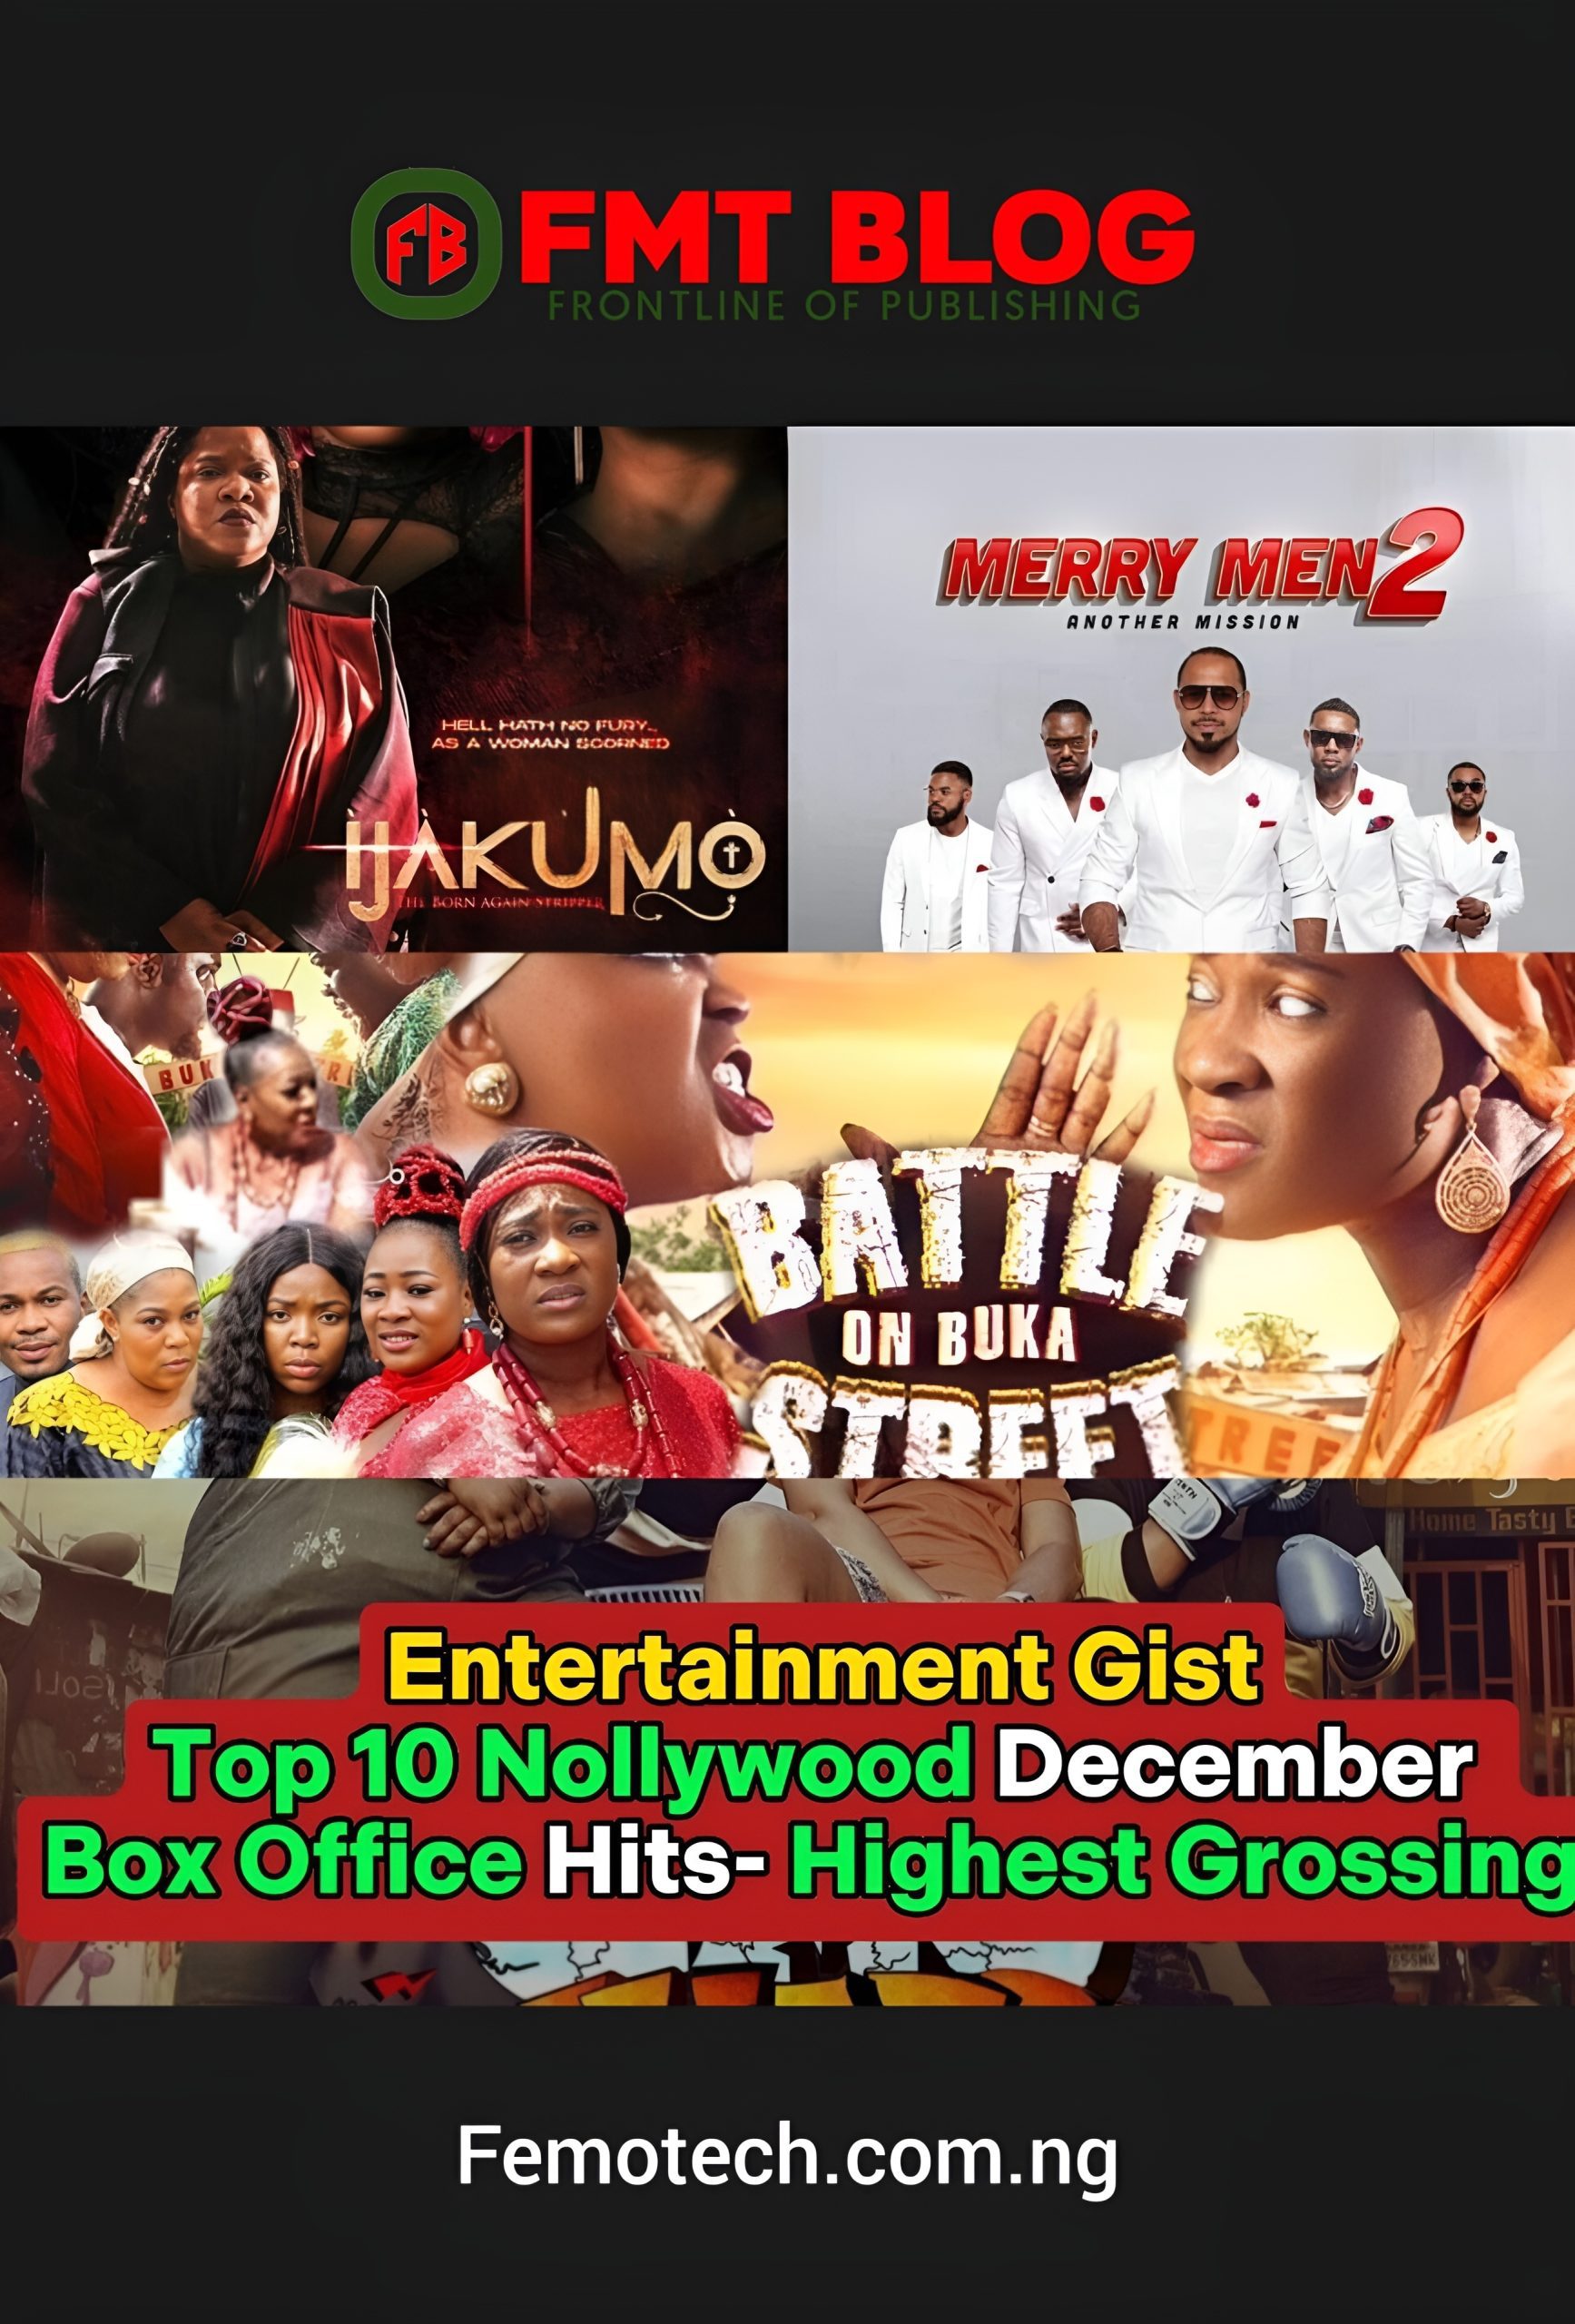 Top 10 Nollywood December Box Office Hits- Highest Grossing